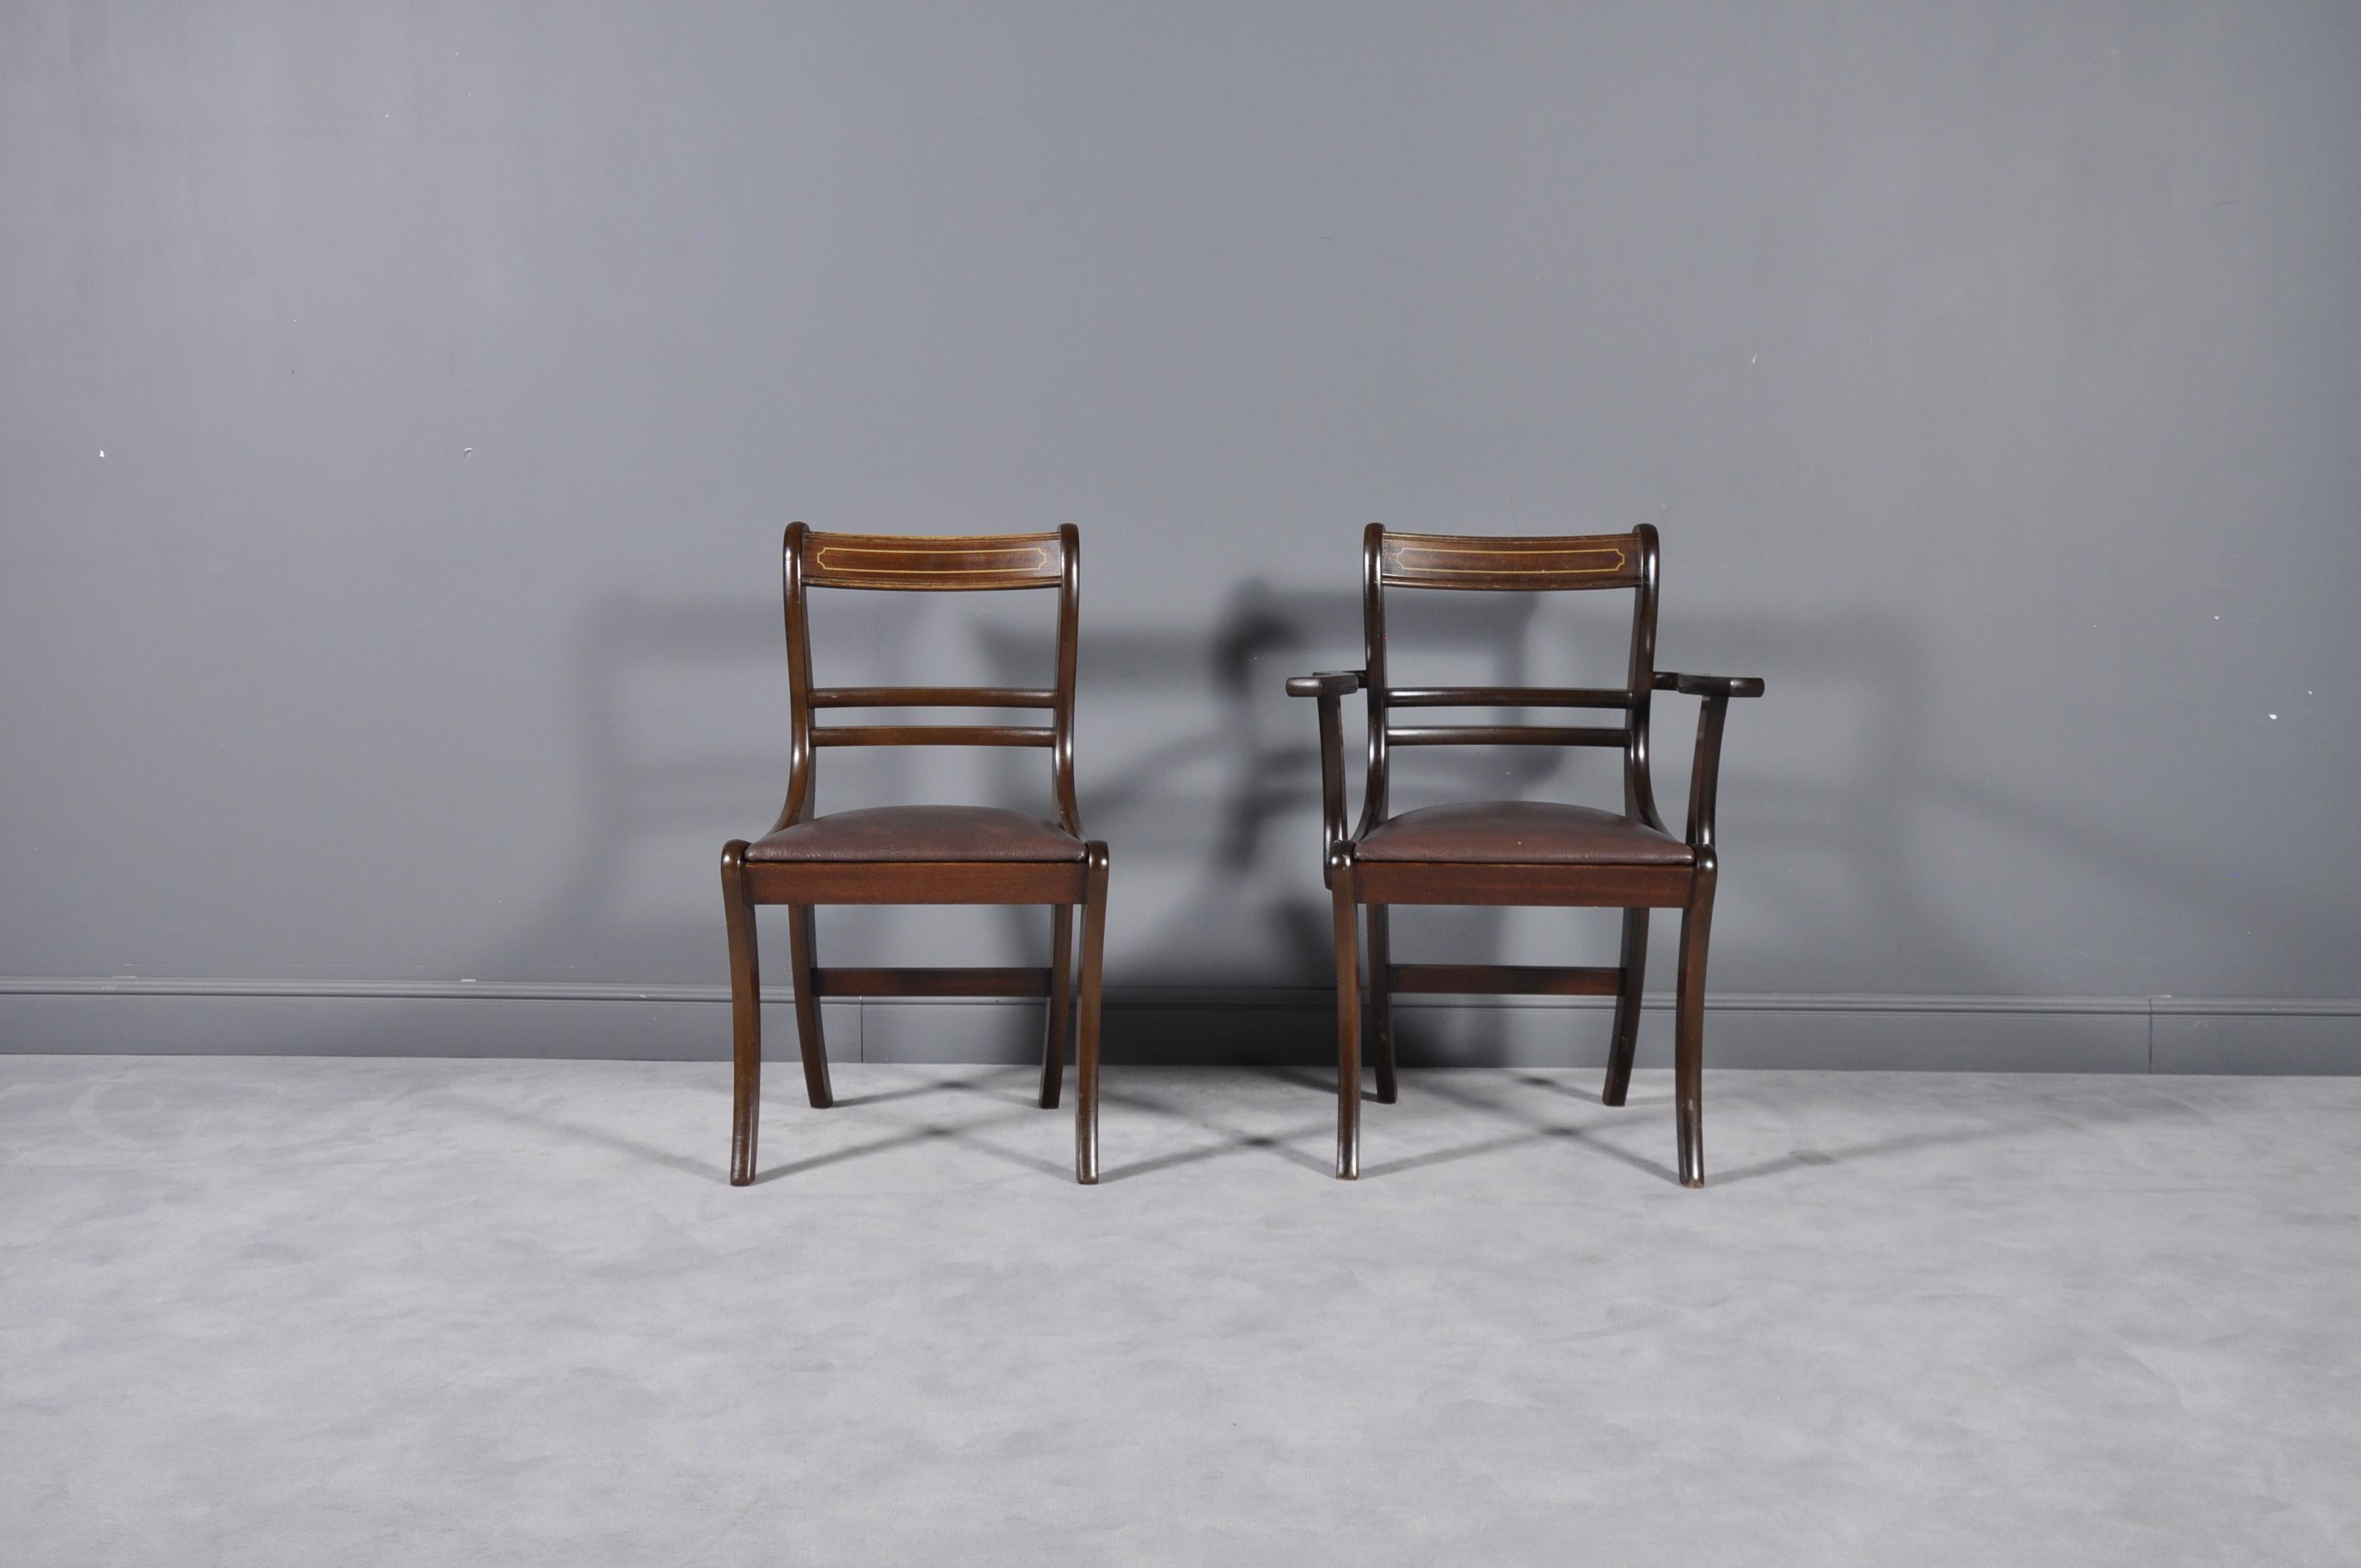 Set of Six 19th Century English Neoclassical Dining Chairs im Angebot 2